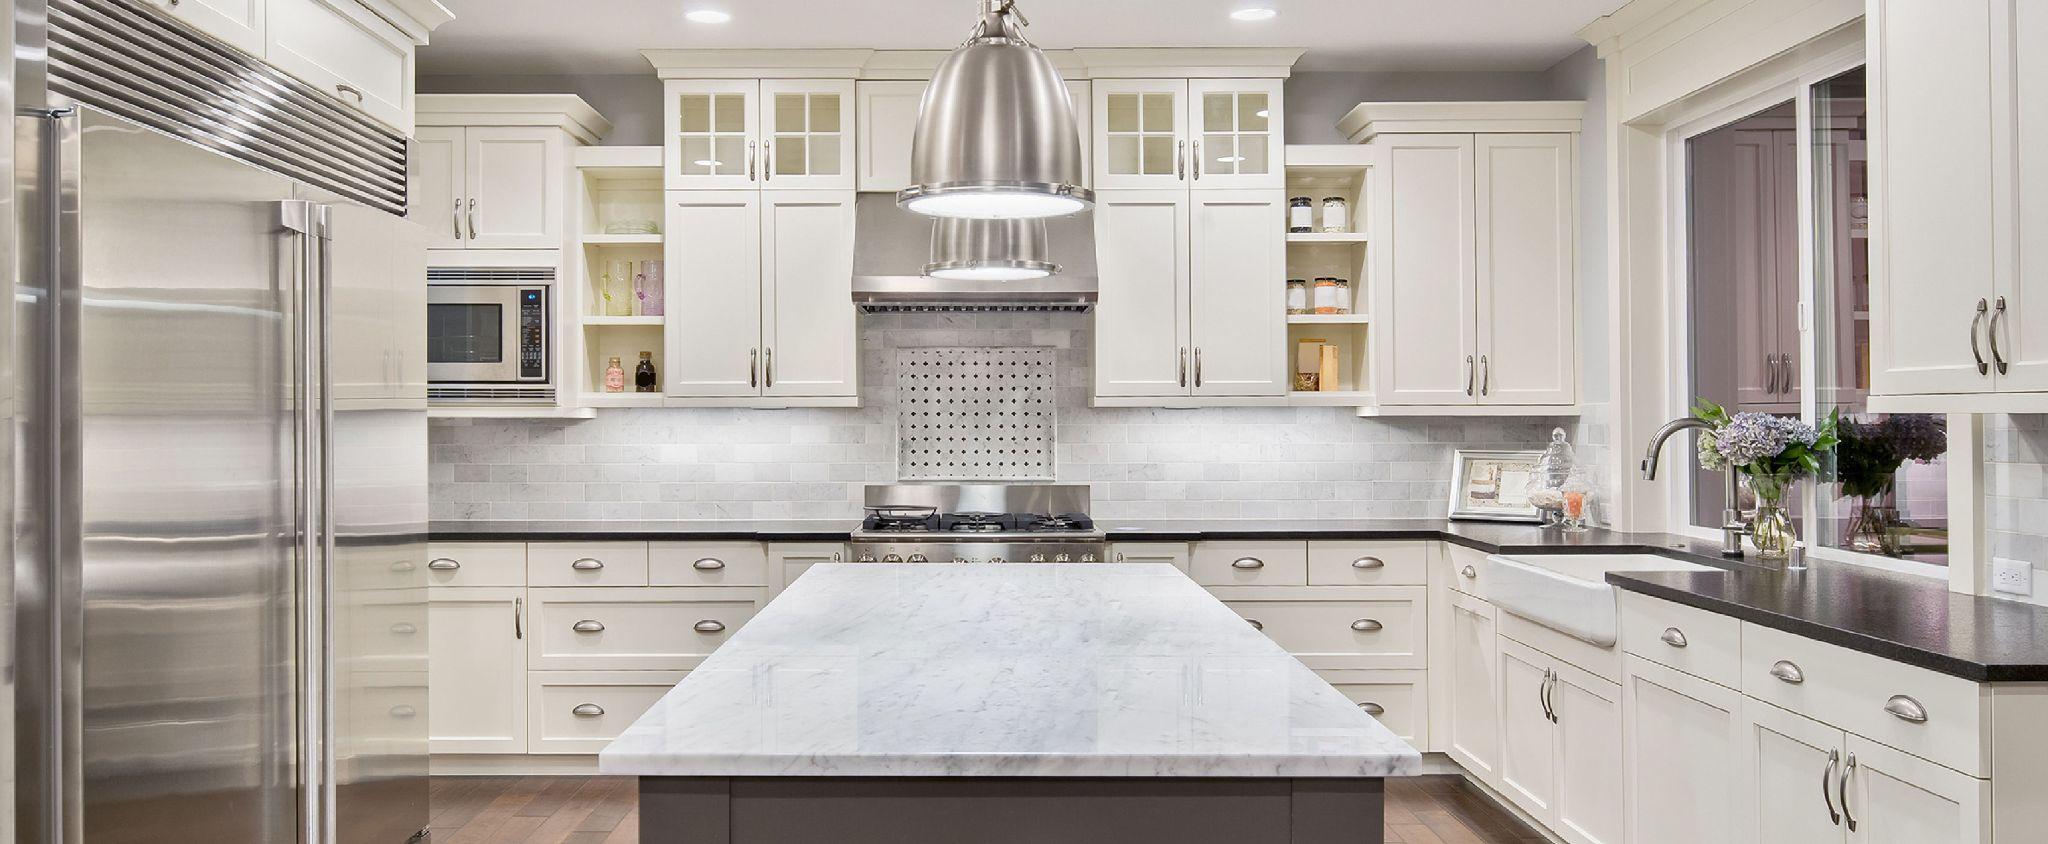 Kitchen Remodelling Myths You Need To Know